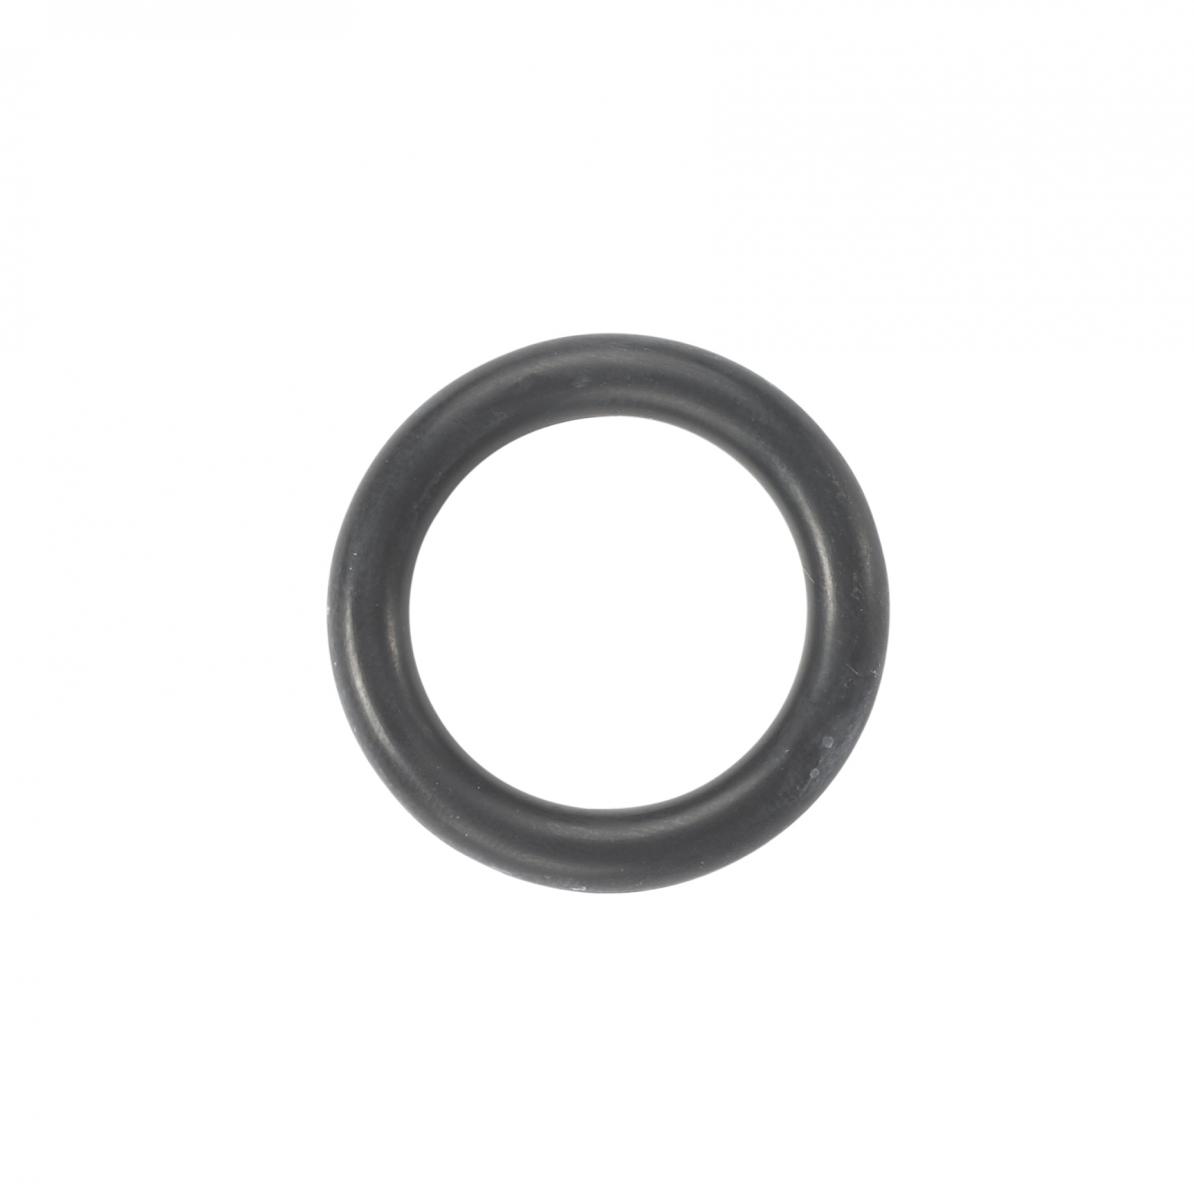 TapeTech® O-Ring. Part number 149031